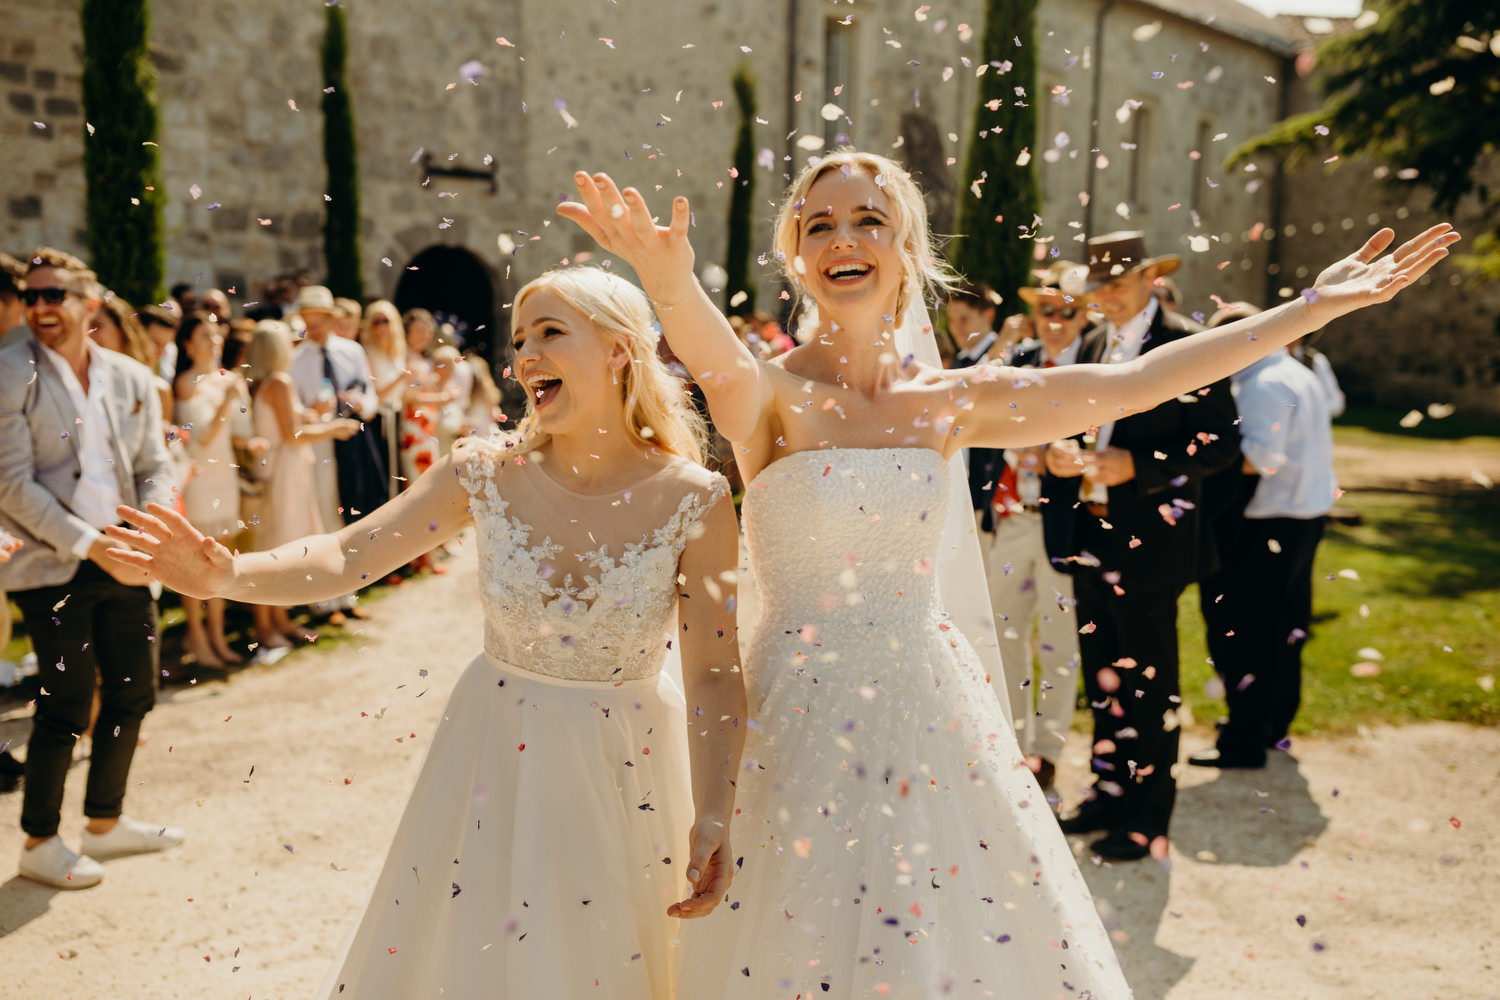 brides getting covered with confetti at wedding in france